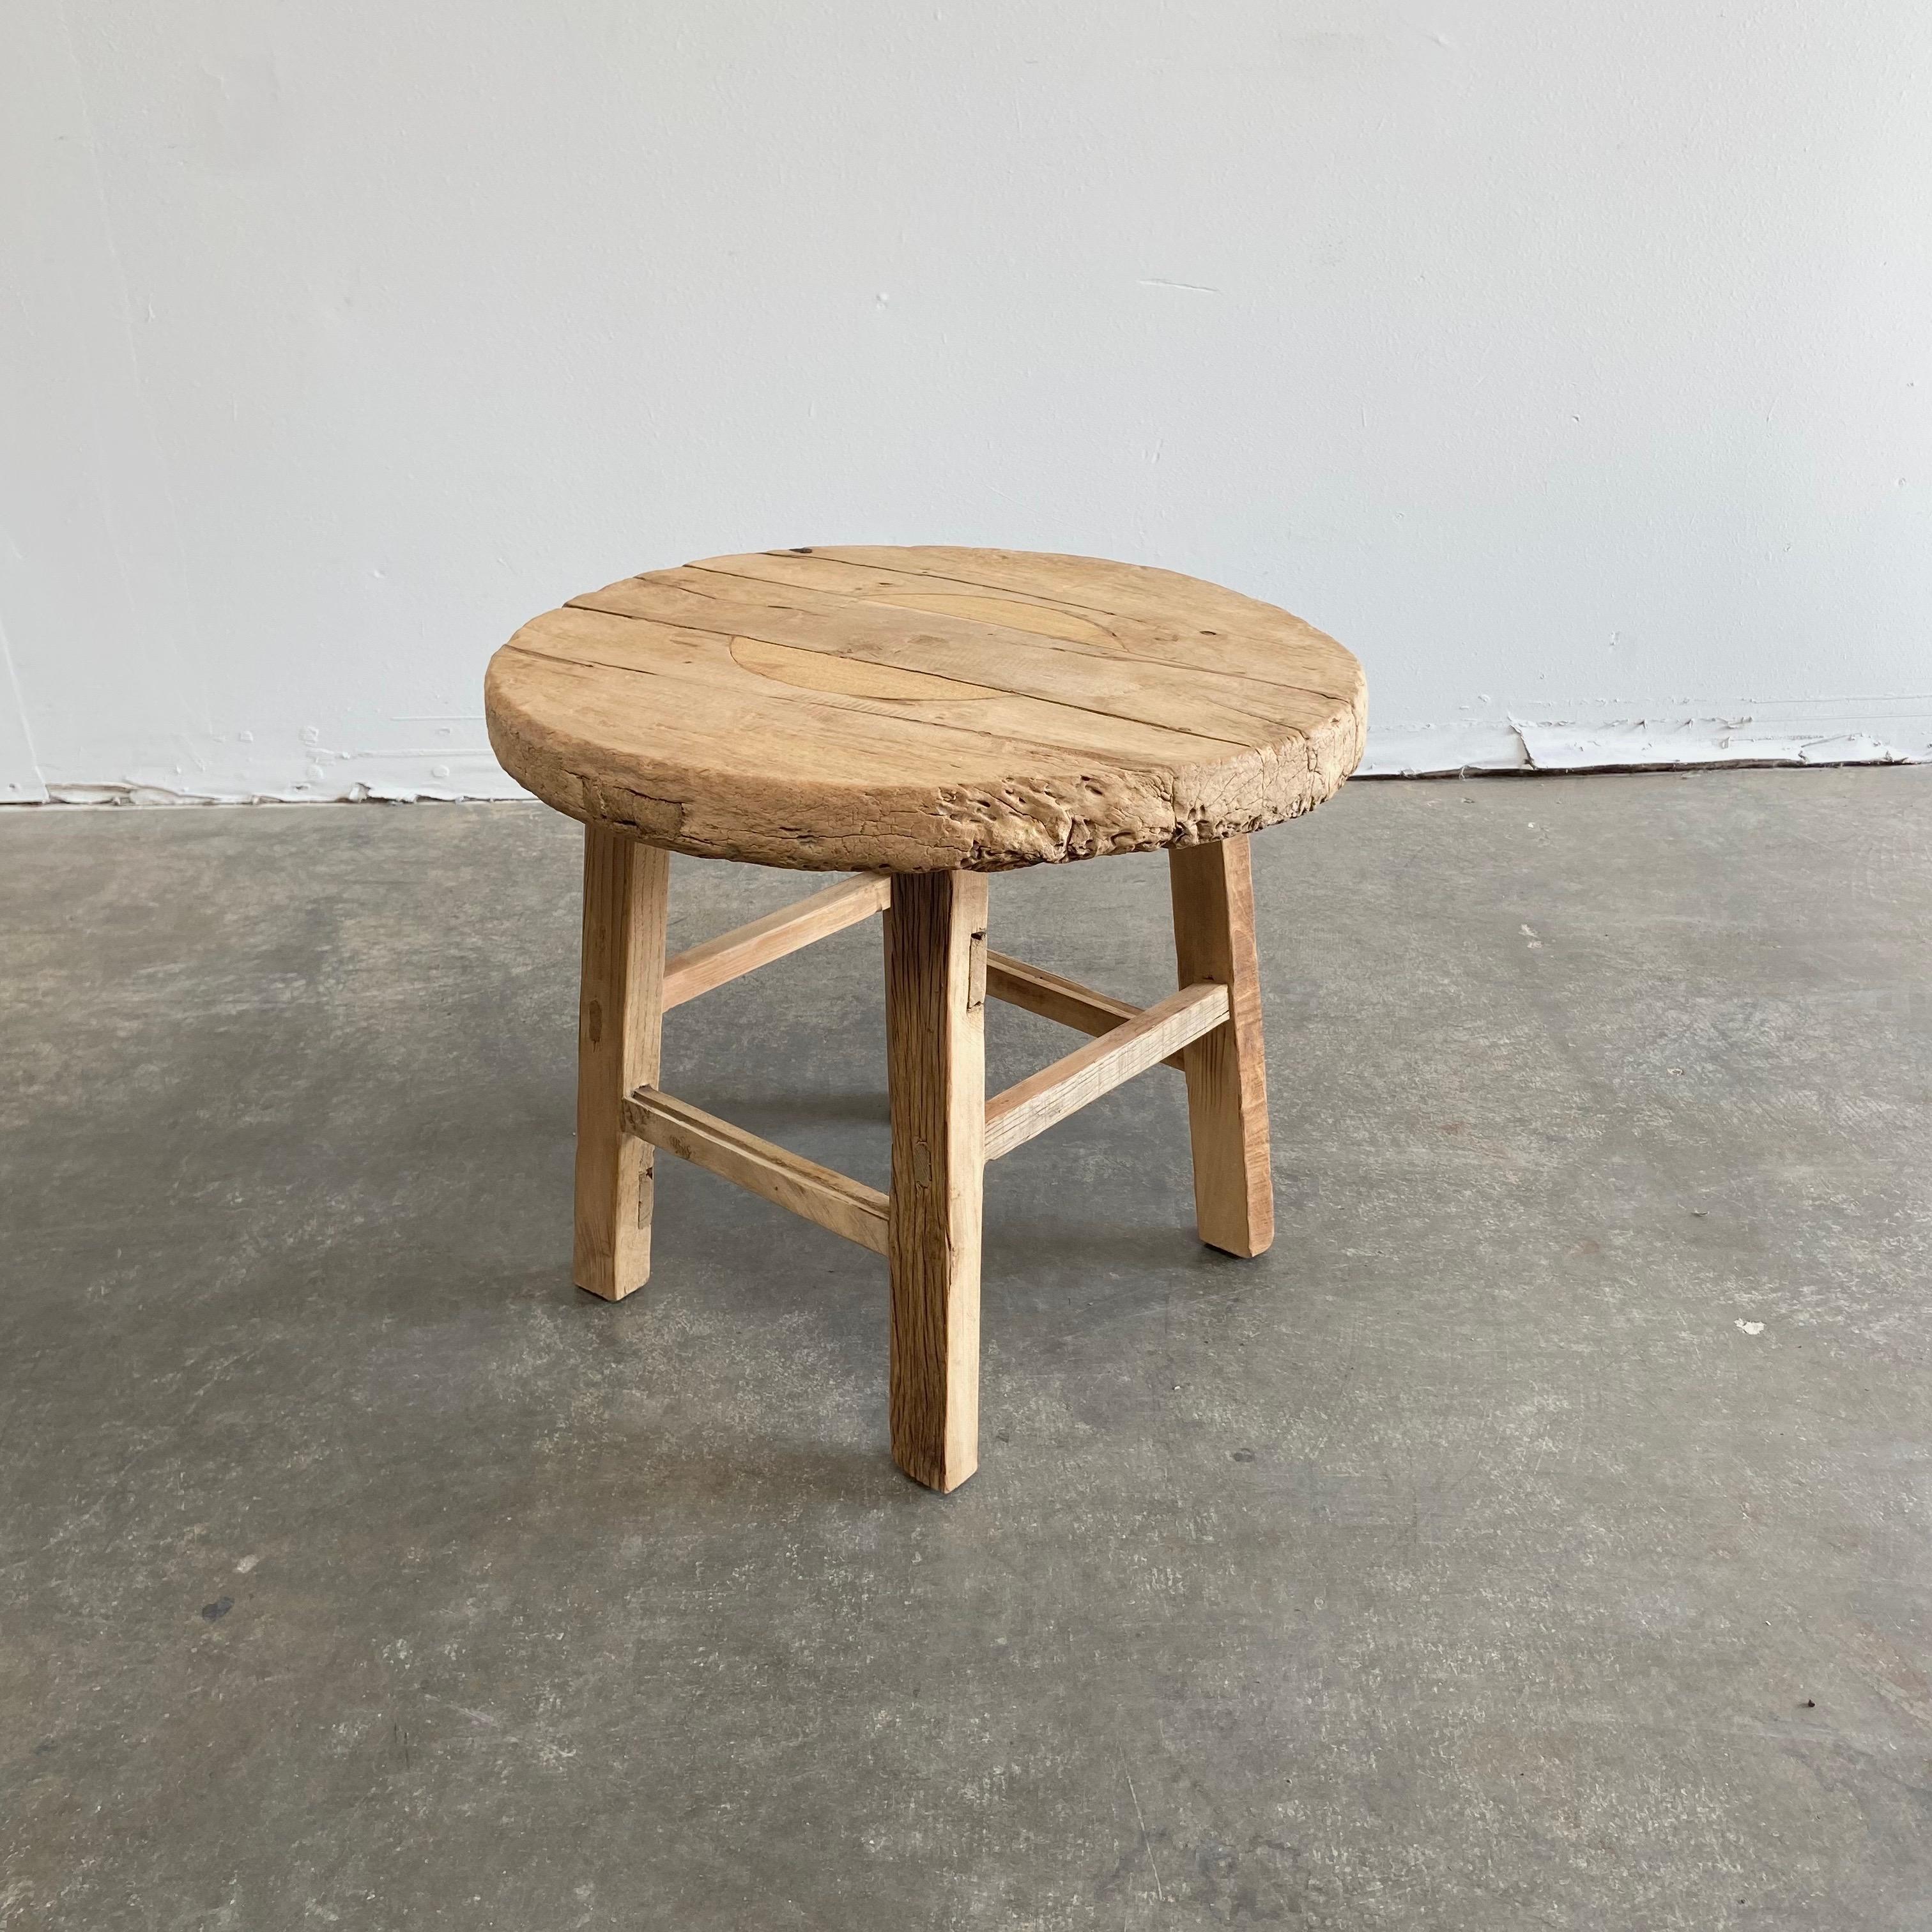 Round natural side table made from reclaimed elmwood Raw natural finish, a warm honey tone in the wood. Solid and sturdy, a great side table for next to a bed, sofa, chairs. Can be stained or painted for a customized look
Size: 23” RD. x 20” H.